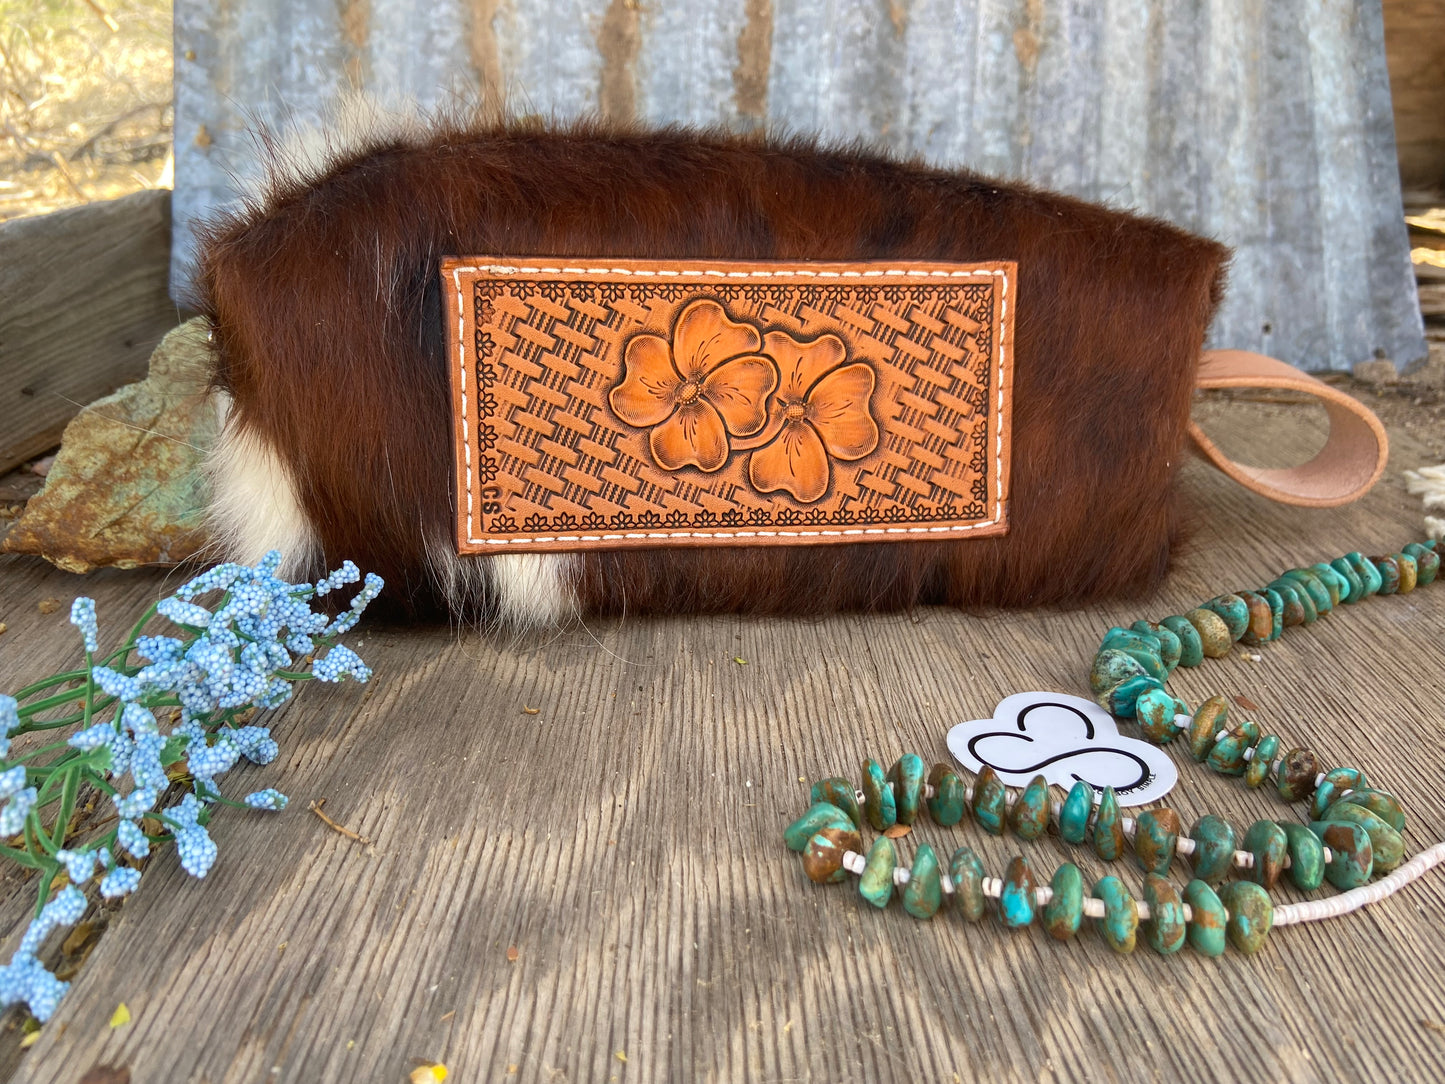 Cowhide Shave Bag with Flower and Basket Stamp Leather Patch